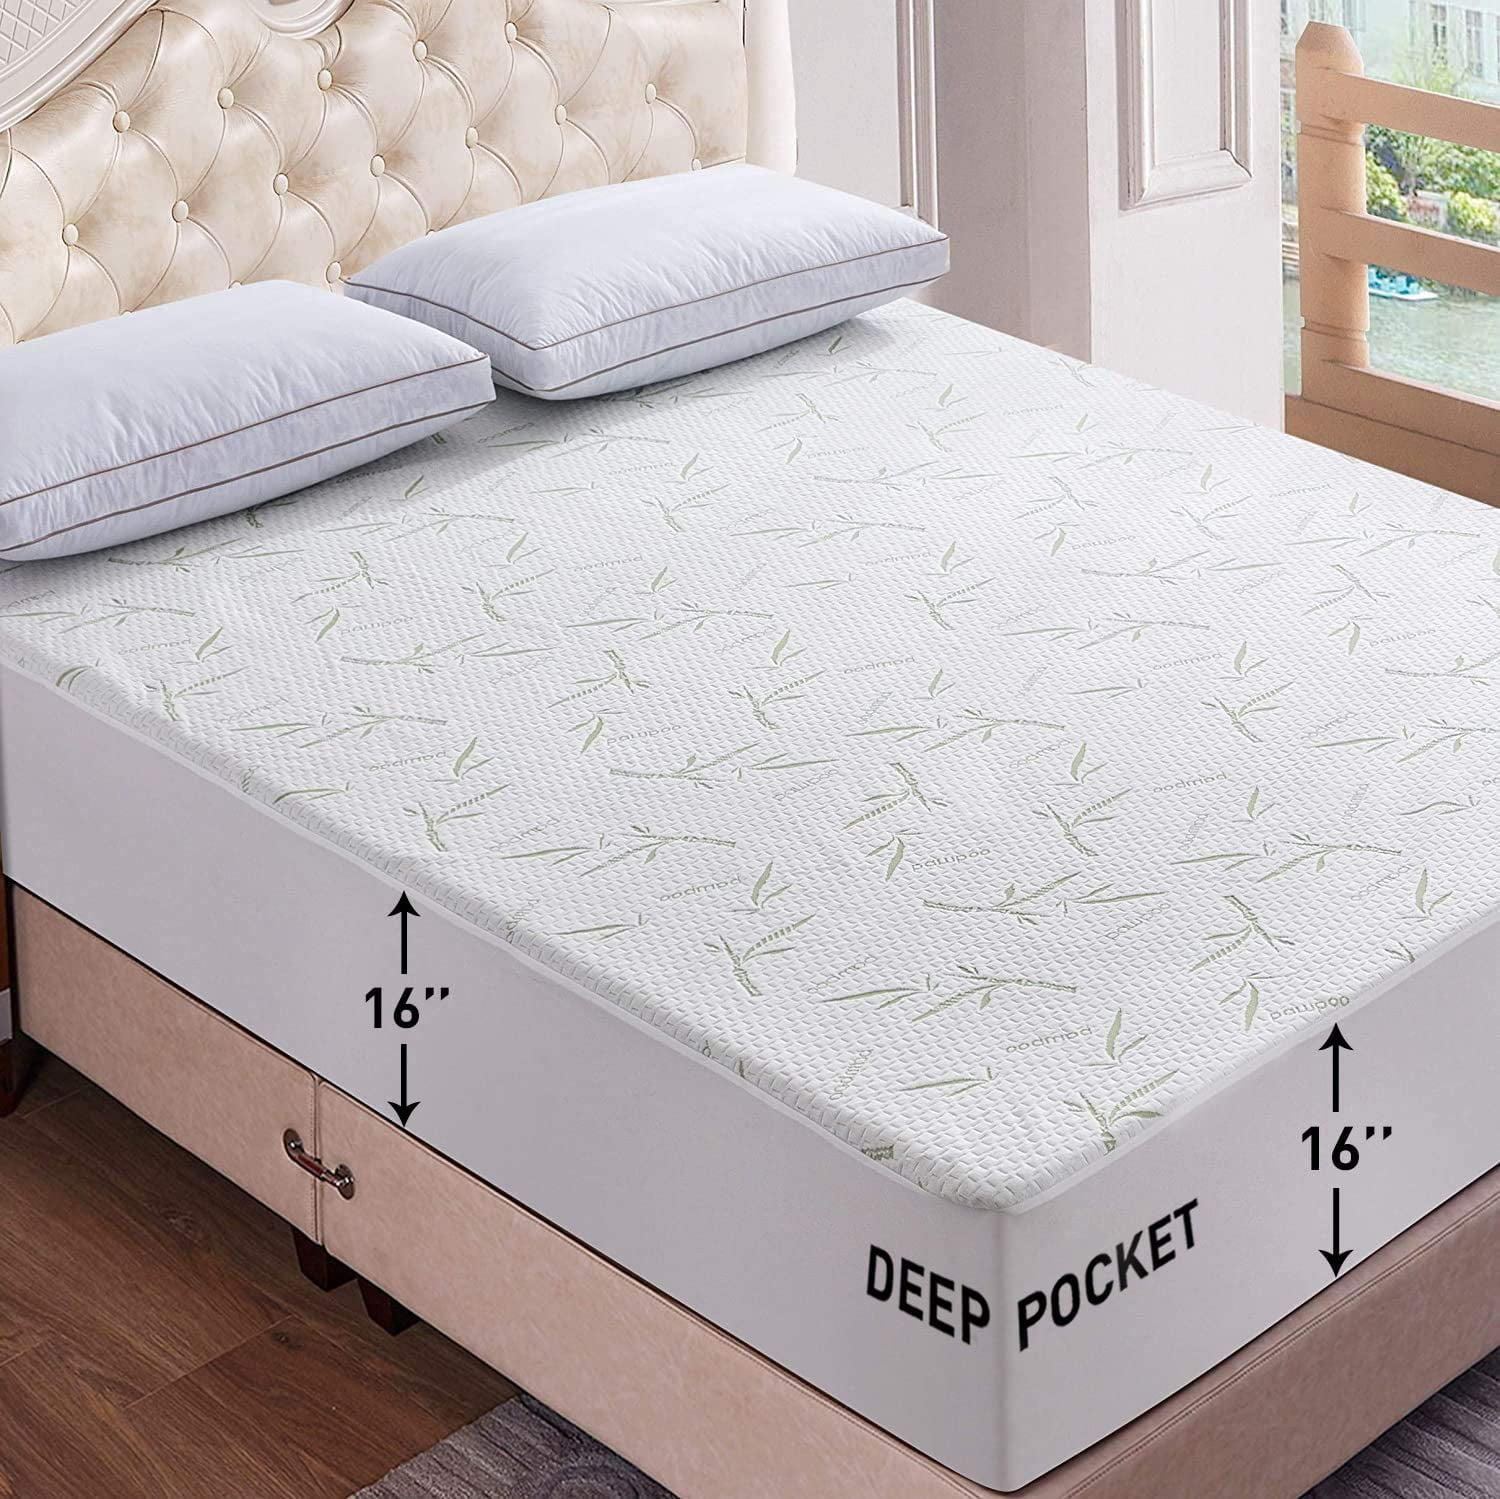 MATTRESS PROTECTOR SHEET SINGLE DOUBLE AND KING SIZE WATERPROOF VINYL 